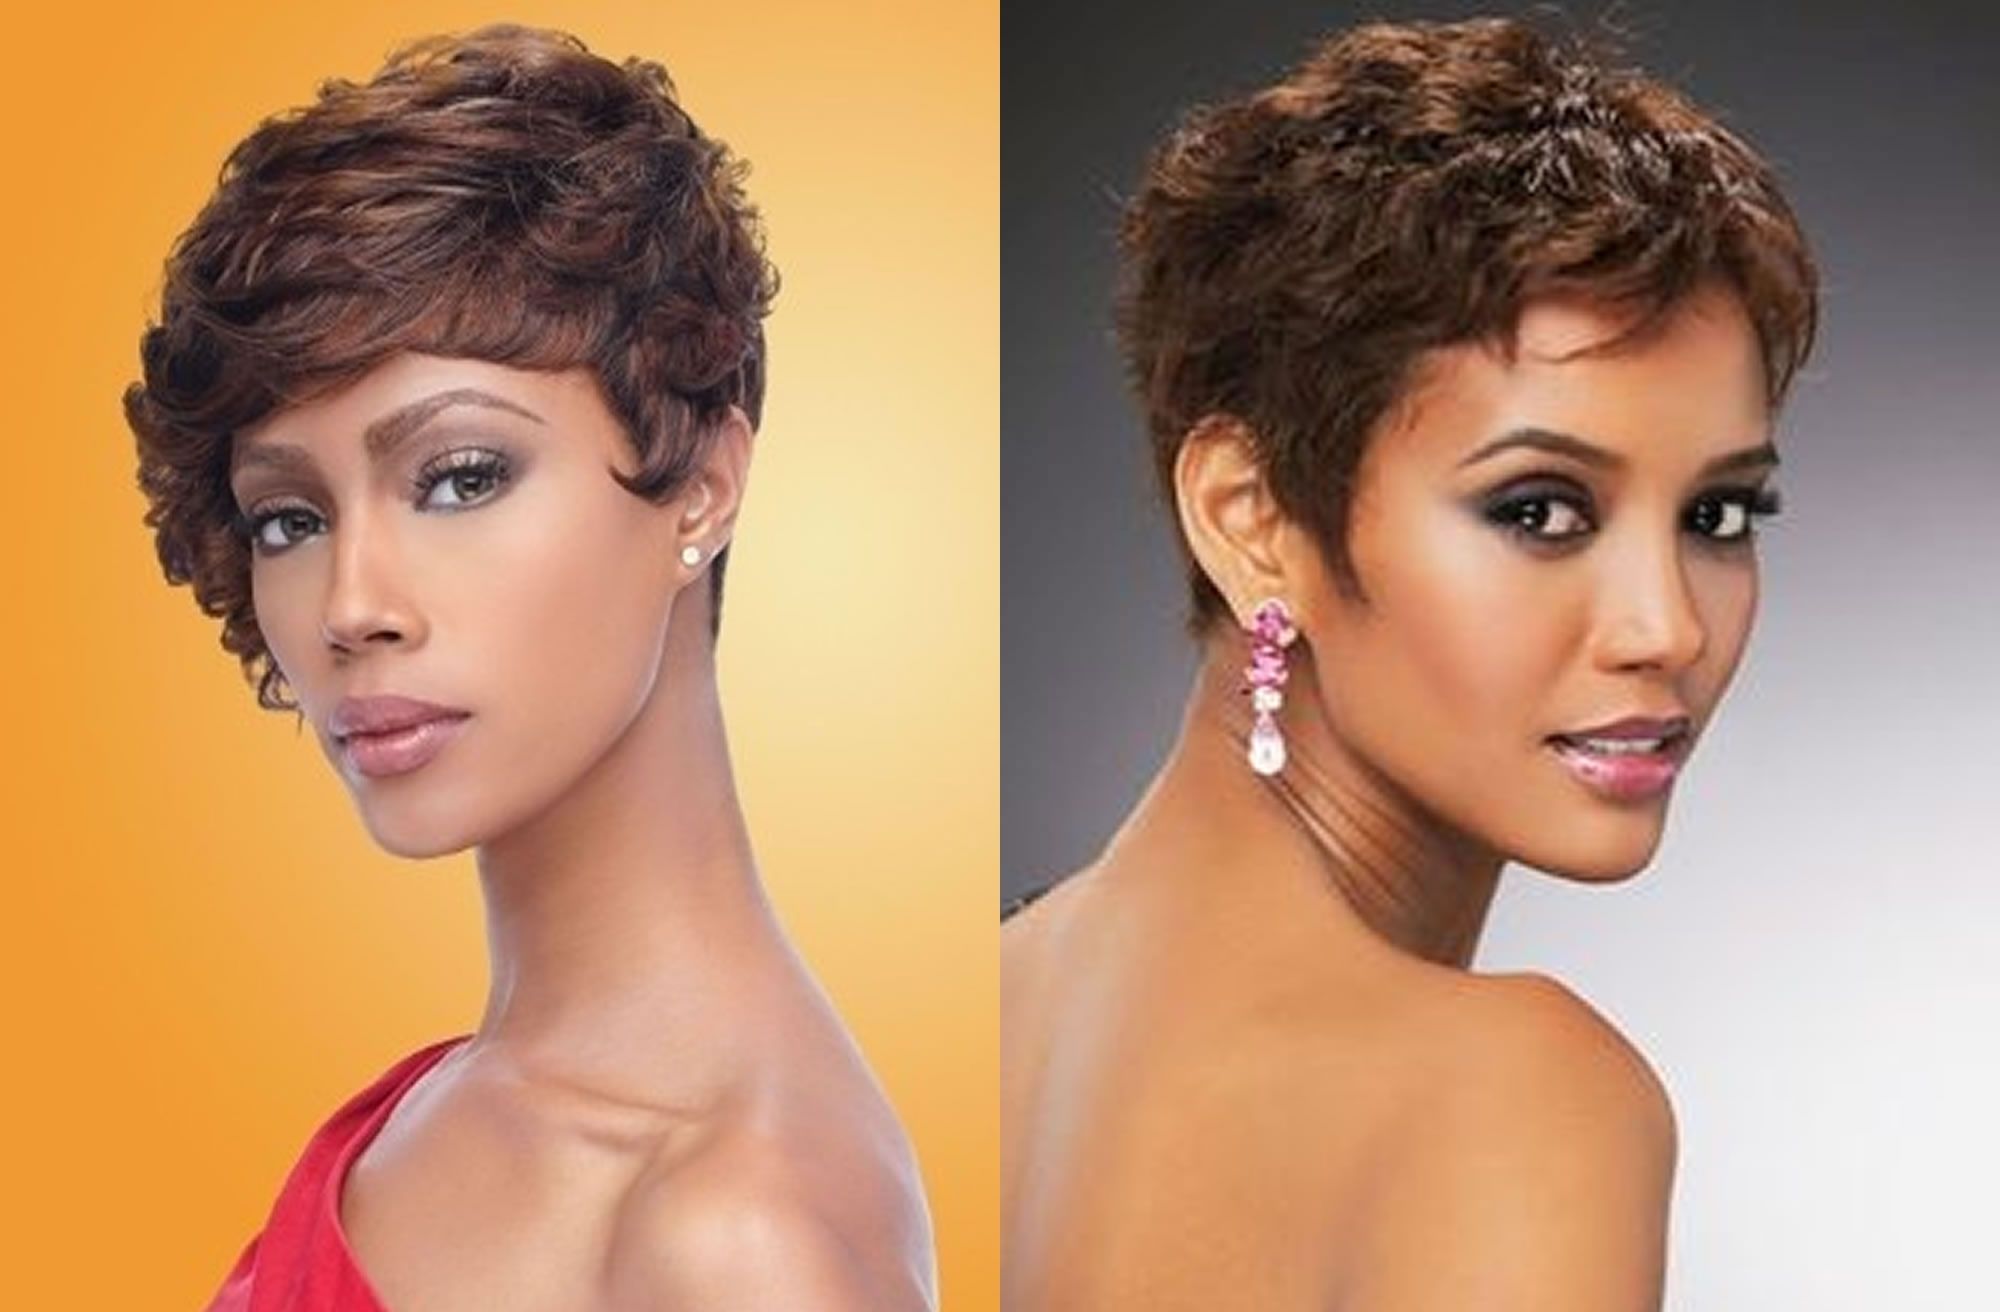 Pixie Hairstyles For Black Women – 60 Cool Short Haircuts For 2017 For Latest Short Wavy Pixie Hairstyles (View 15 of 15)